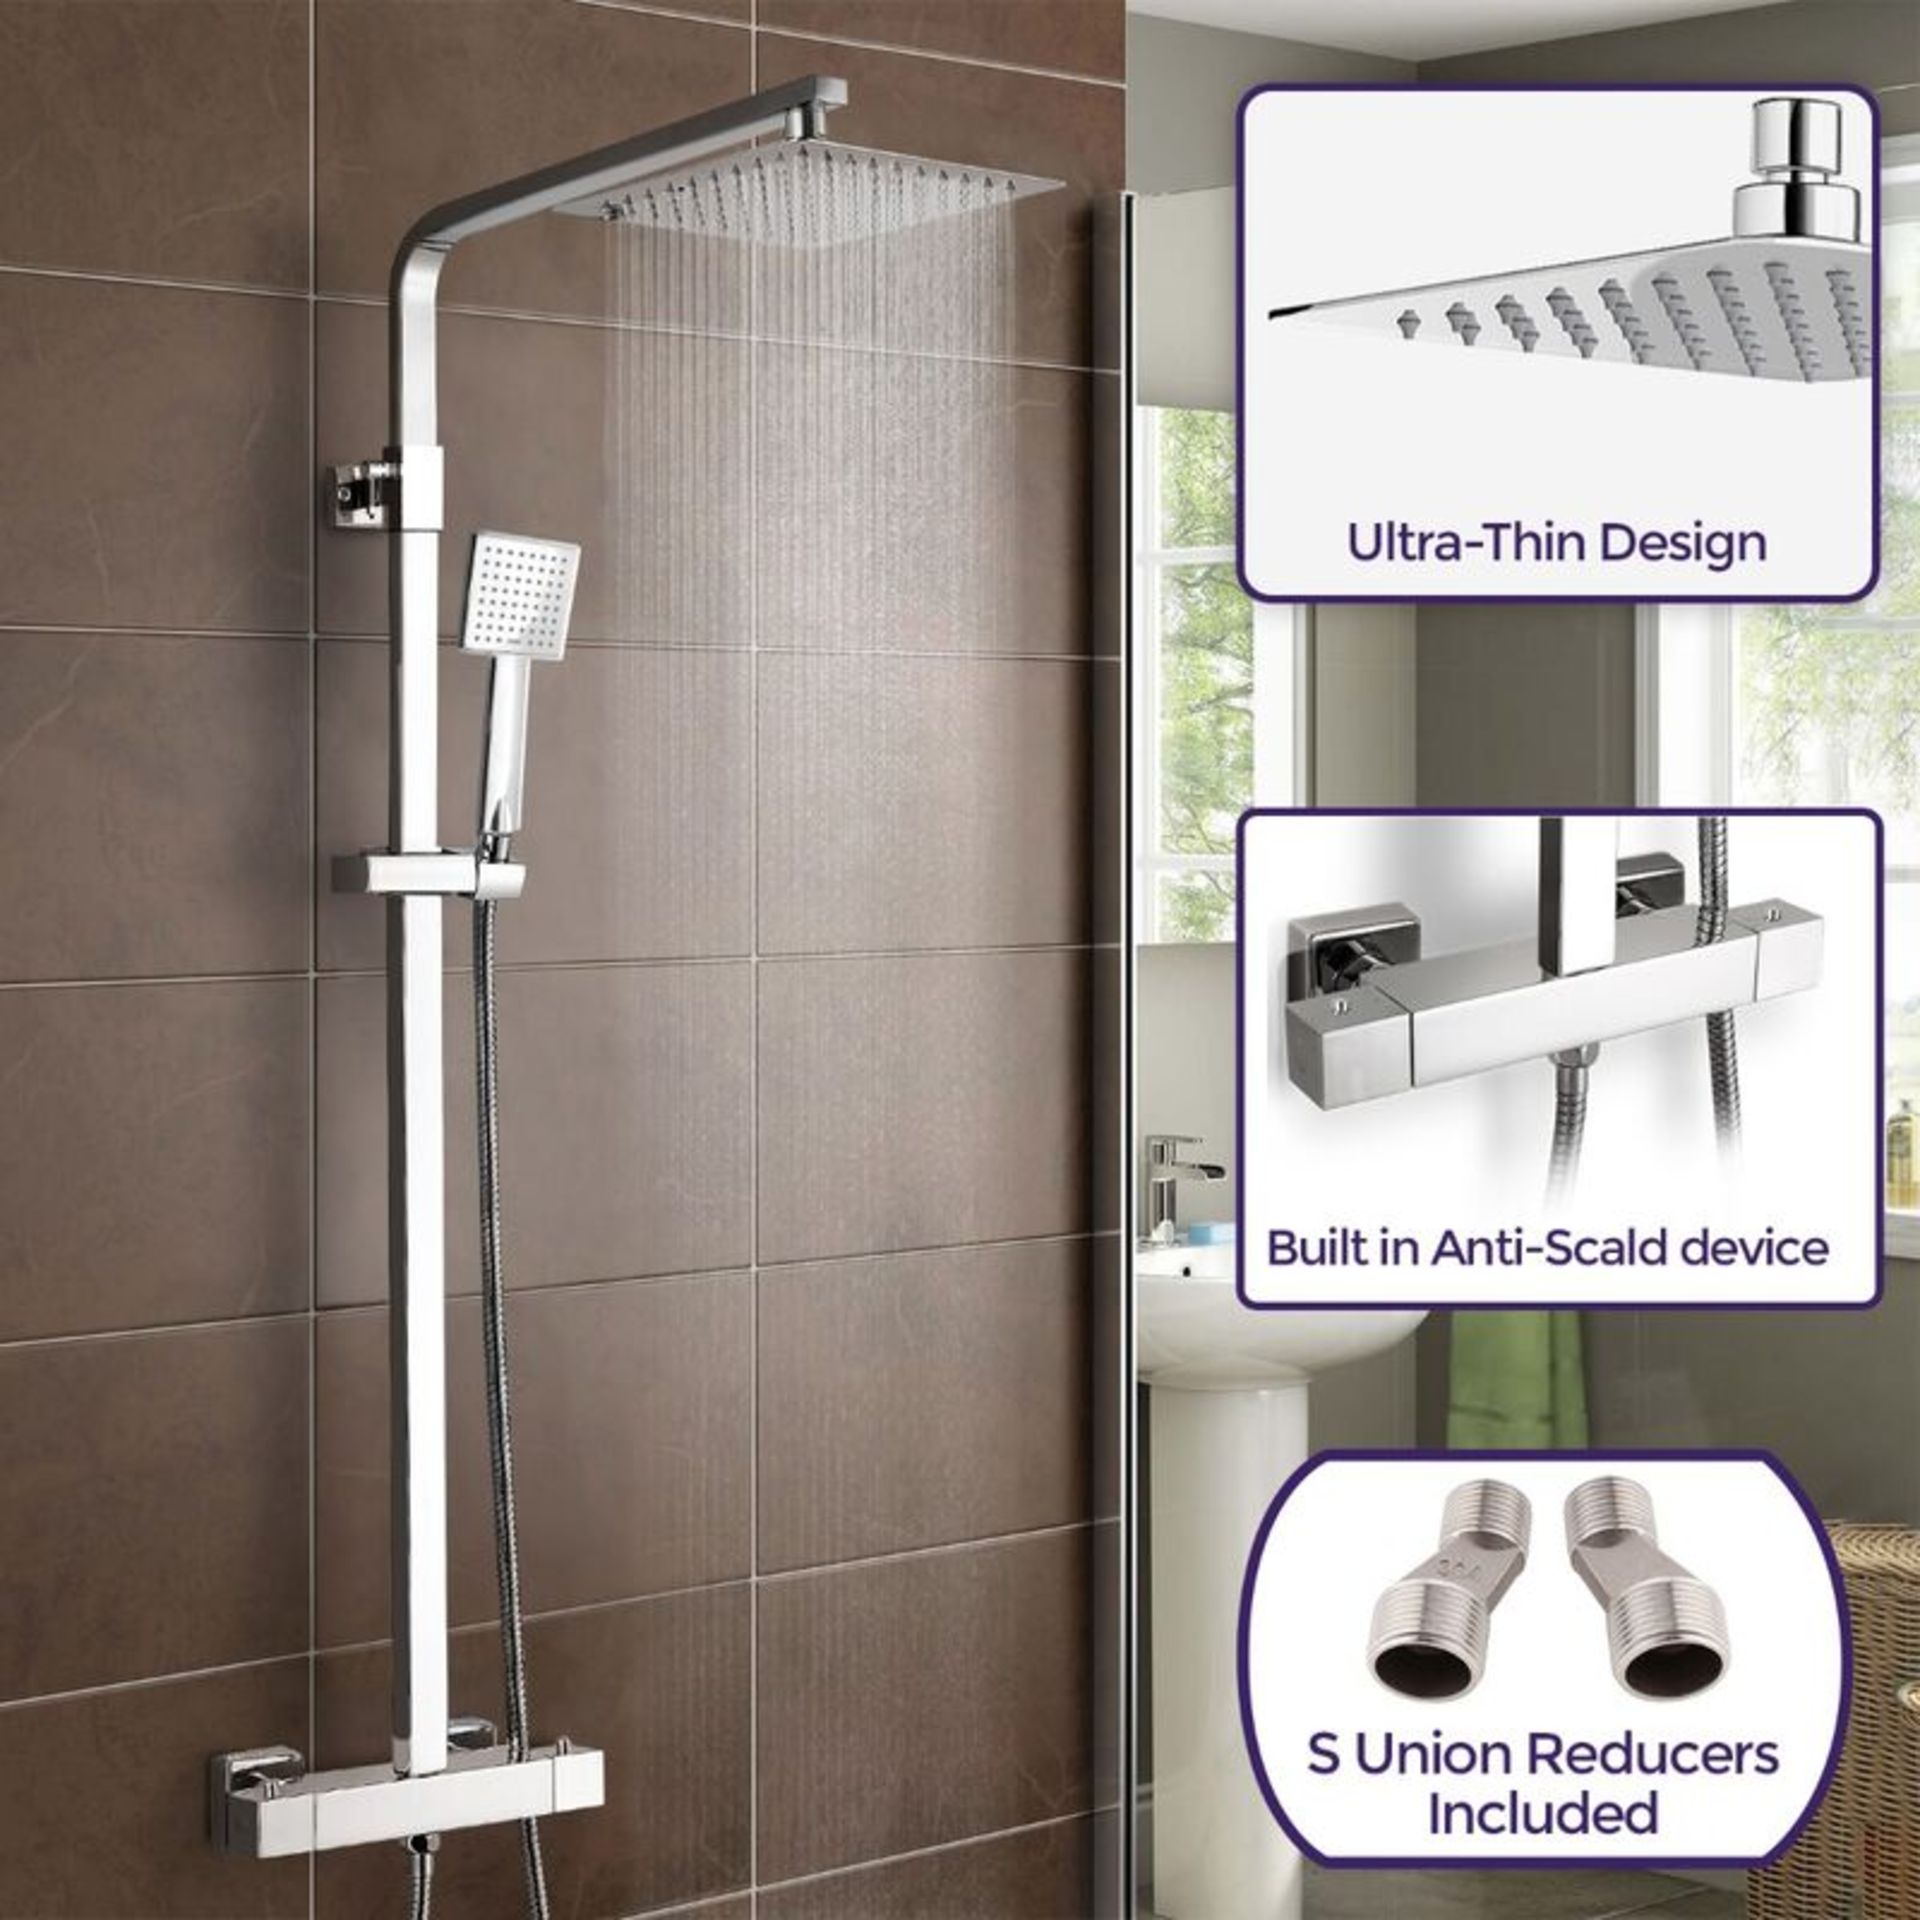 New (G32) Thermostatic Shower Mixer With Slide Rail Kit Square. Above the handset sits this stu...